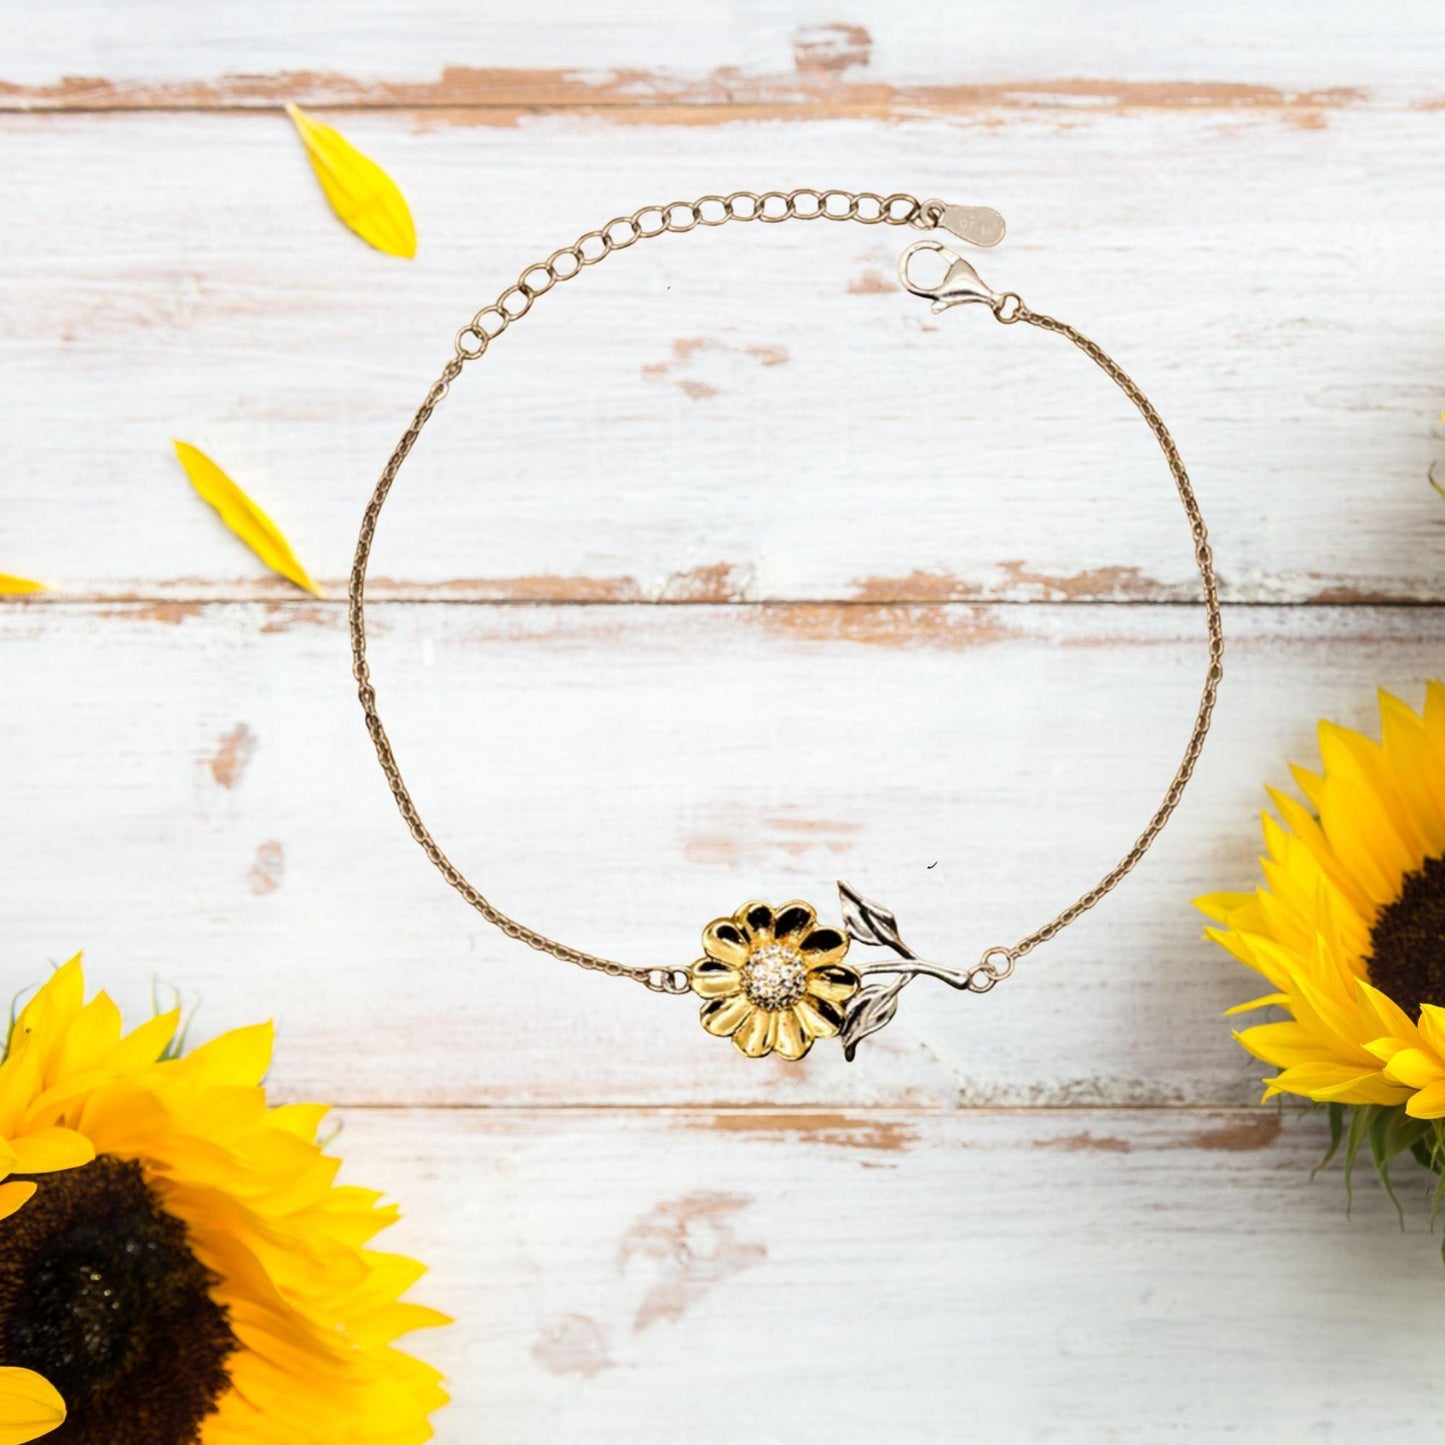 Remarkable Marketing Manager Gifts, Your dedication and hard work, Inspirational Birthday Christmas Unique Sunflower Bracelet For Marketing Manager, Coworkers, Men, Women, Friends - Mallard Moon Gift Shop